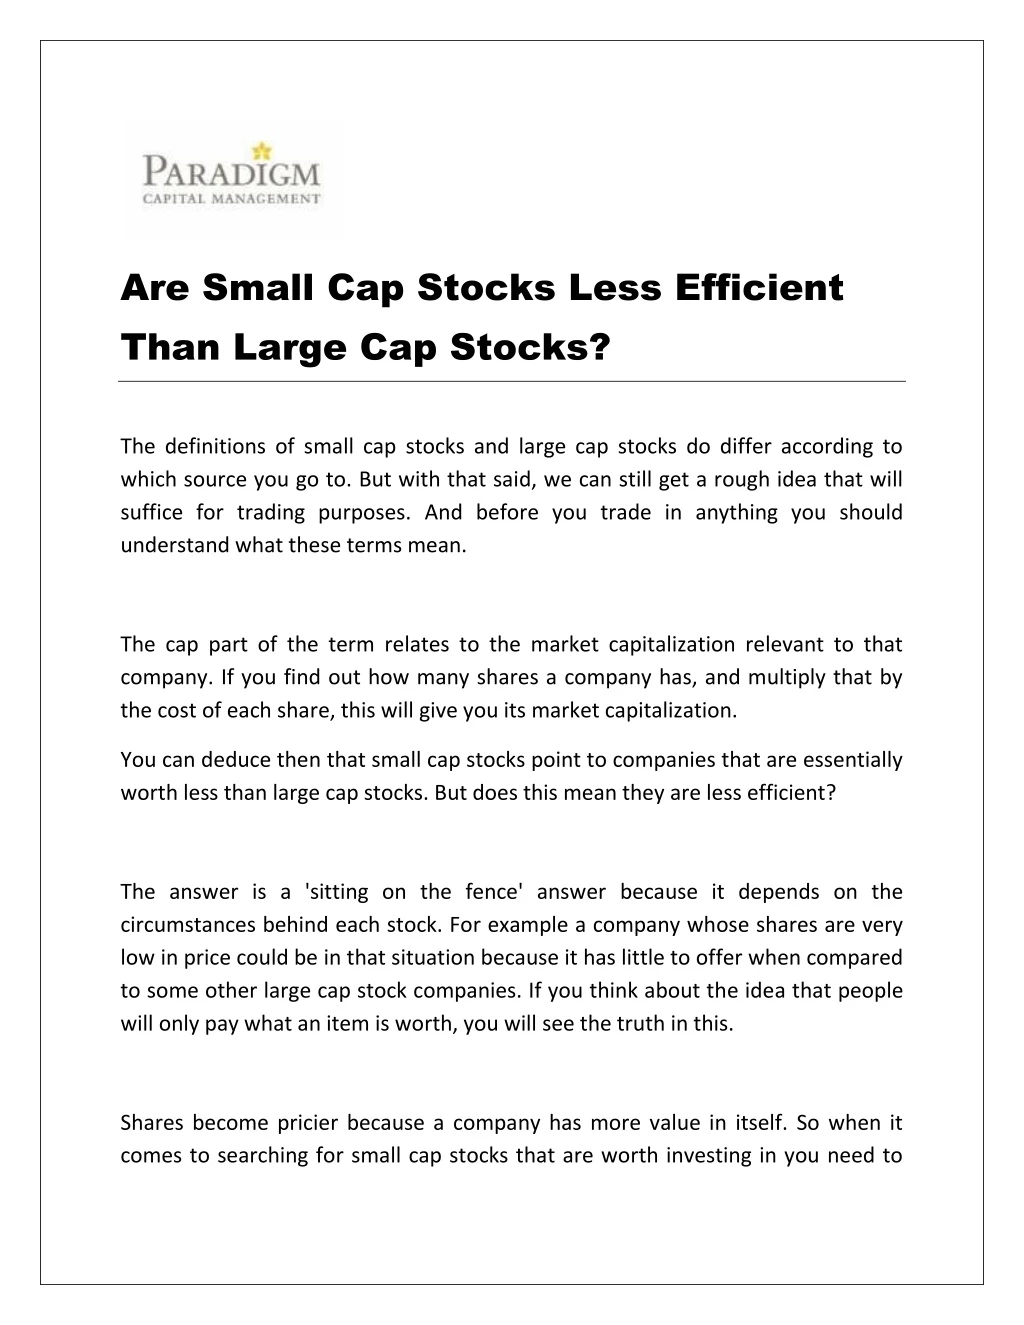 are small cap stocks less efficient than large